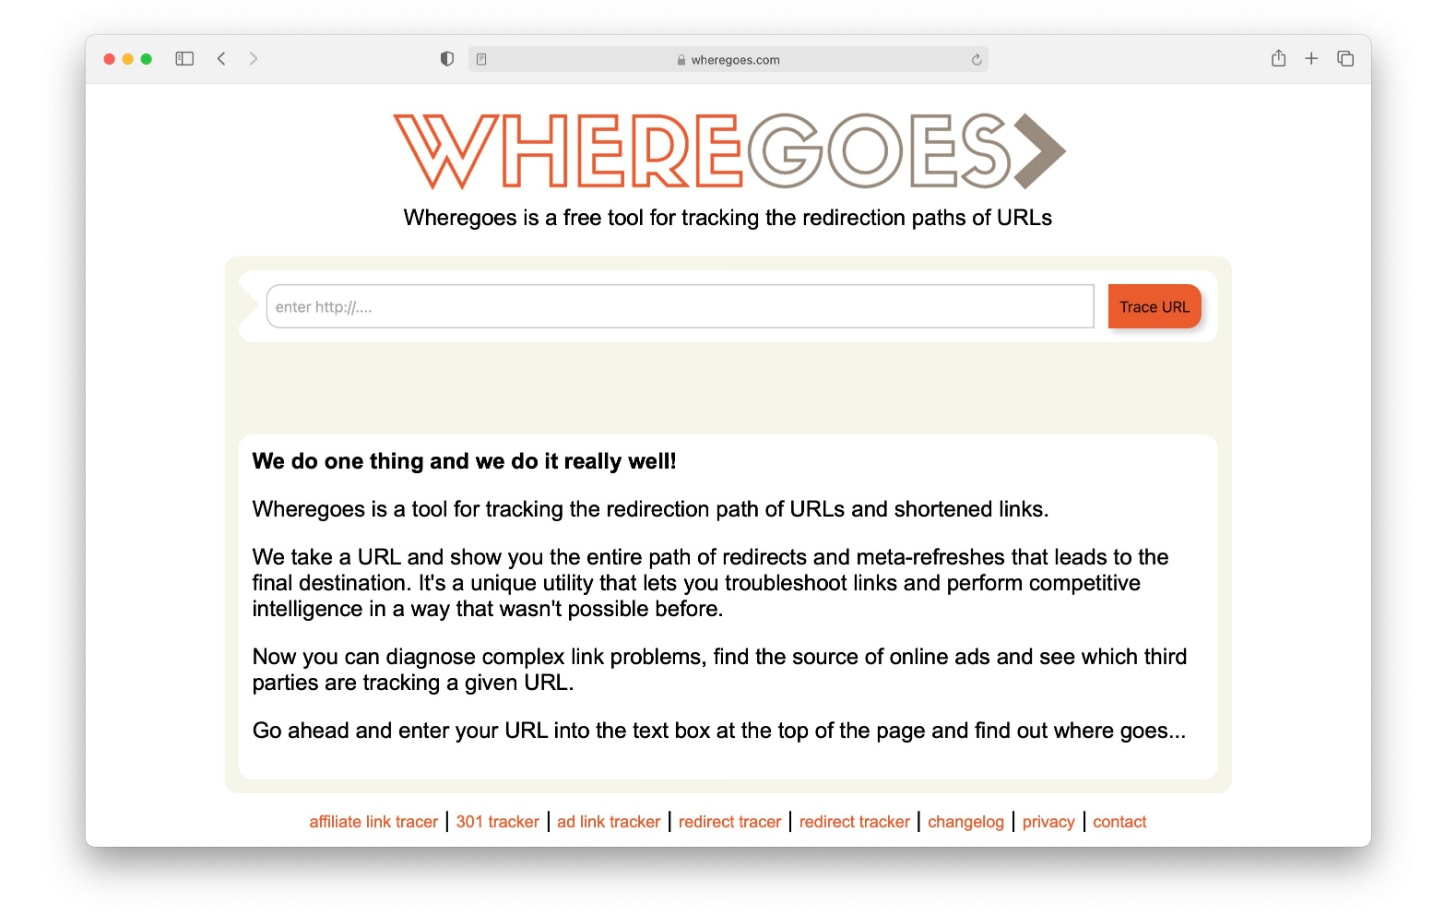 Where goes is an SEO tool for tracking links